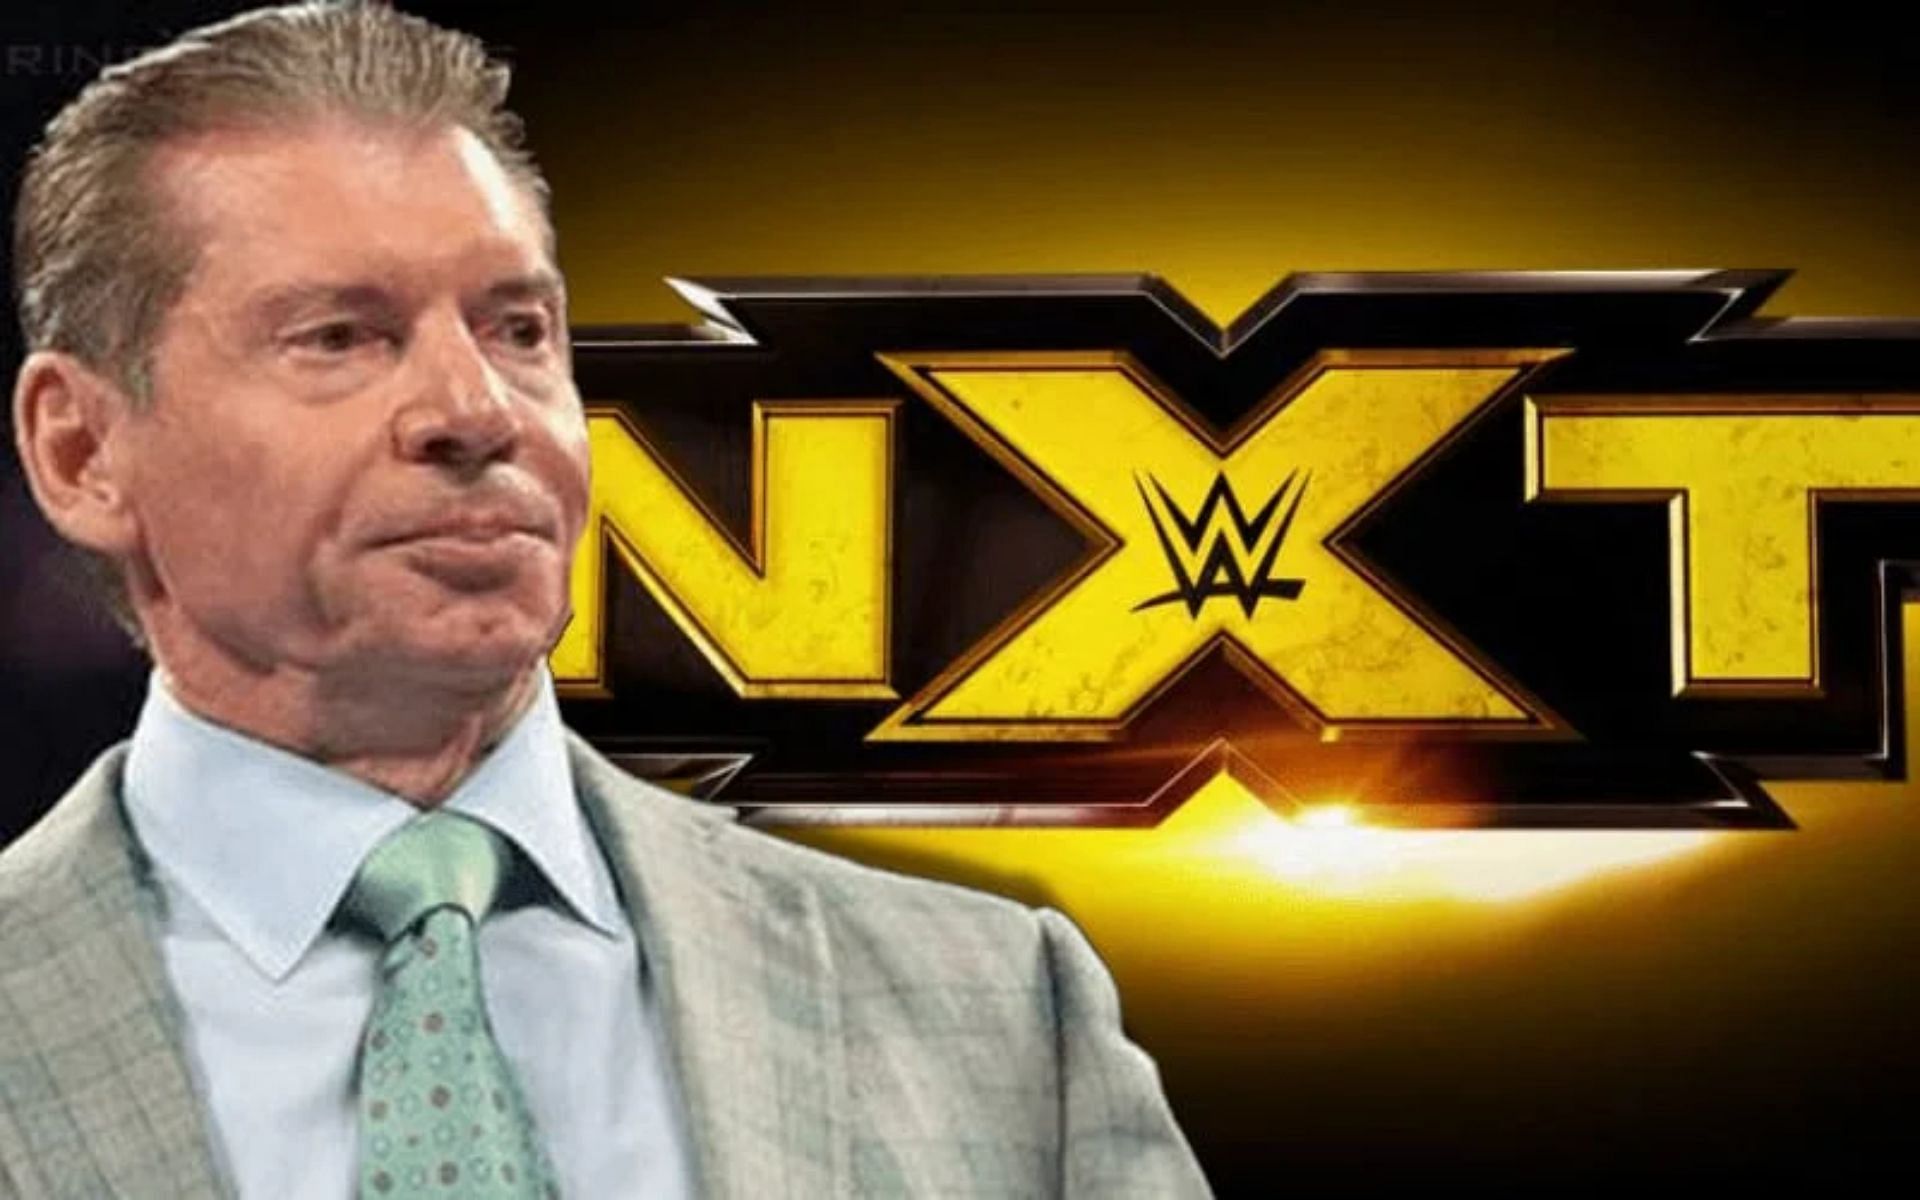 Vince McMahon is the chairman of WWE